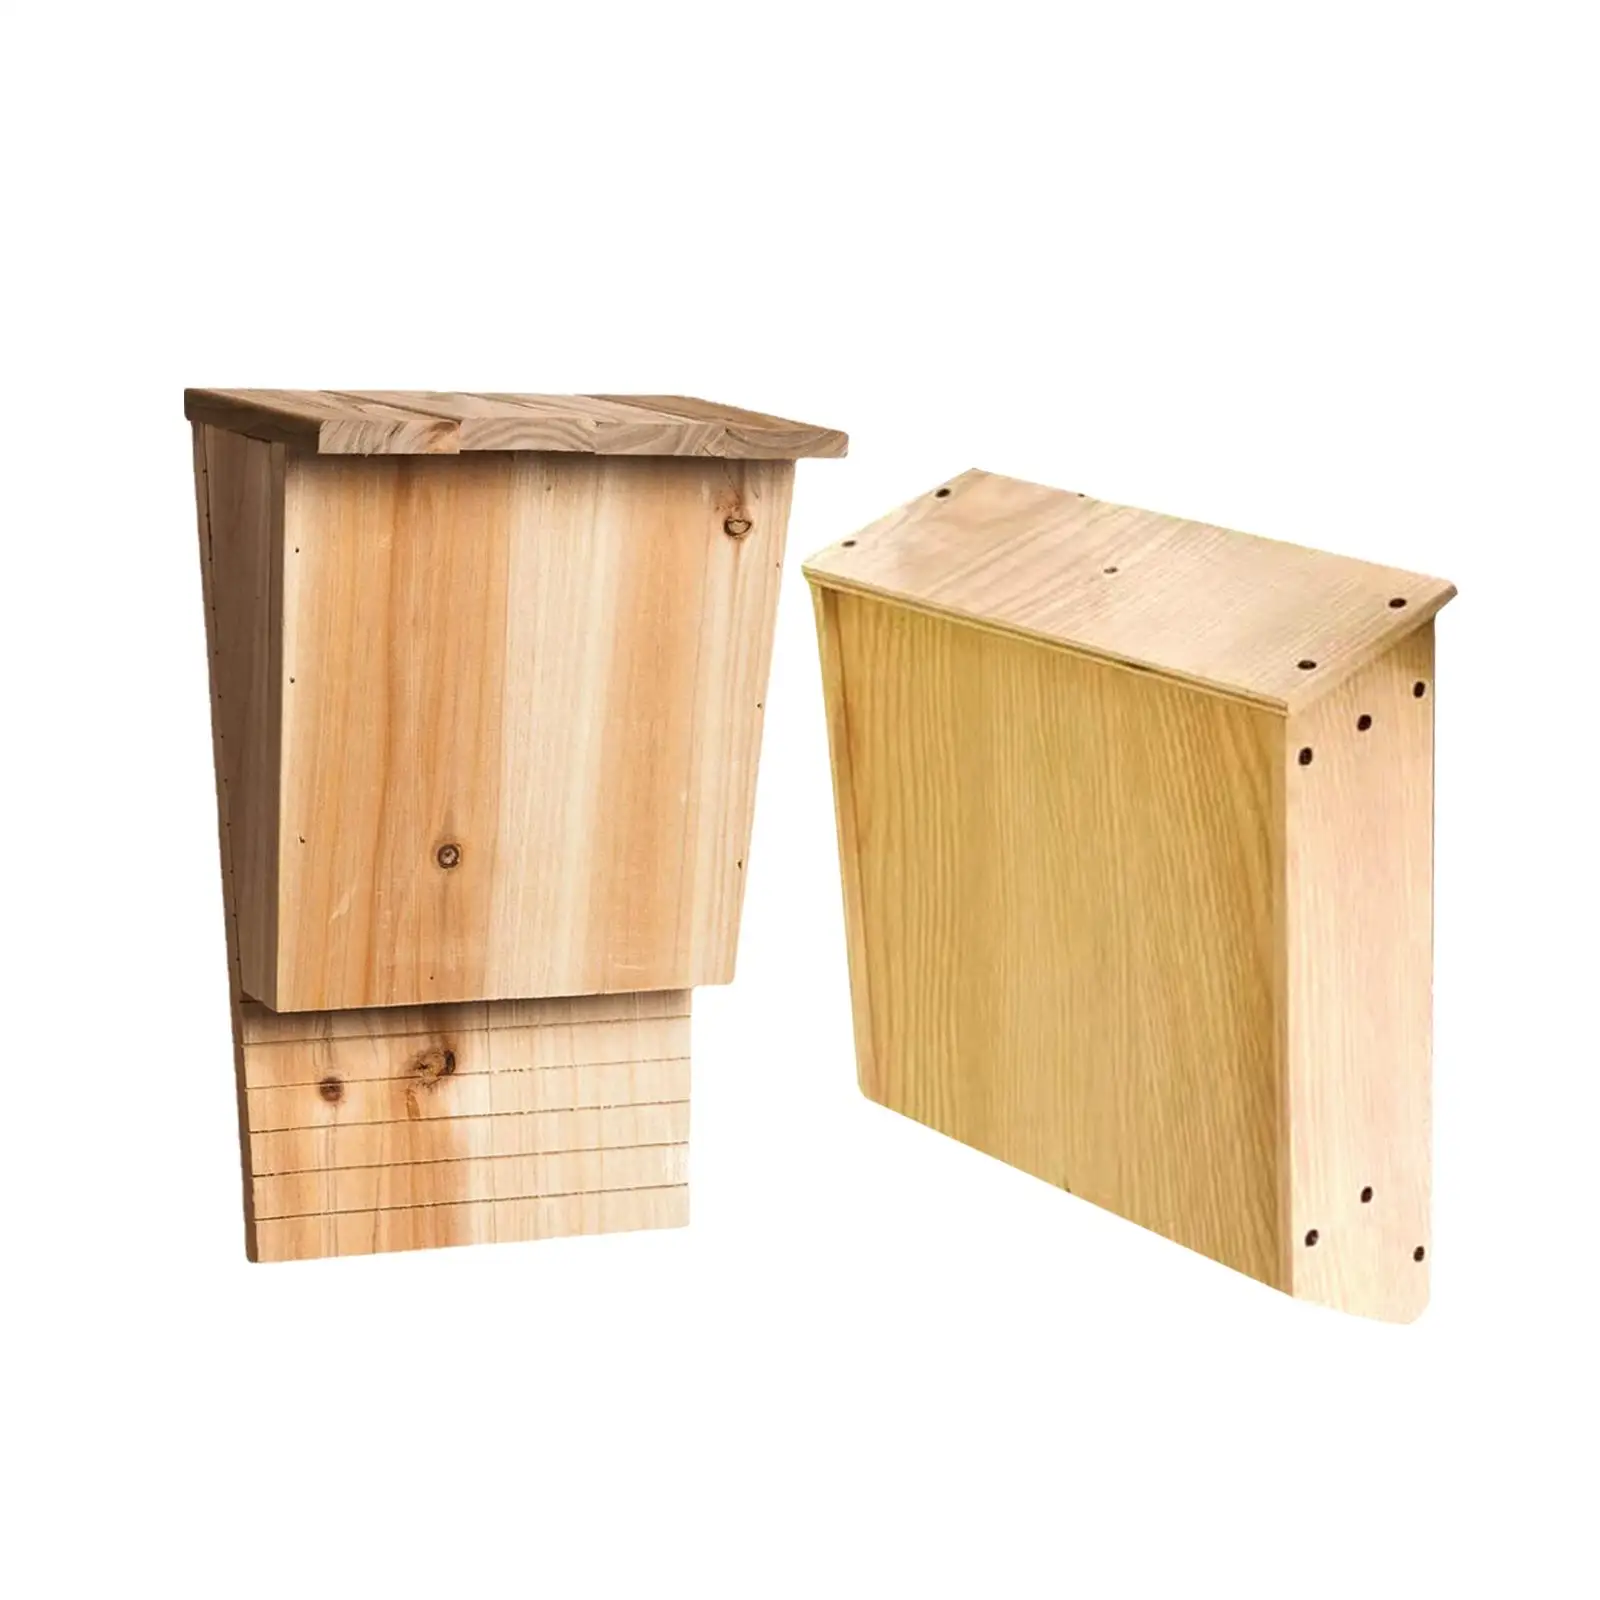 Bat House Big box Wooden Weather Resistant professional Easy to Land and Roost Outdoor Shelter Handcrafted Supplies